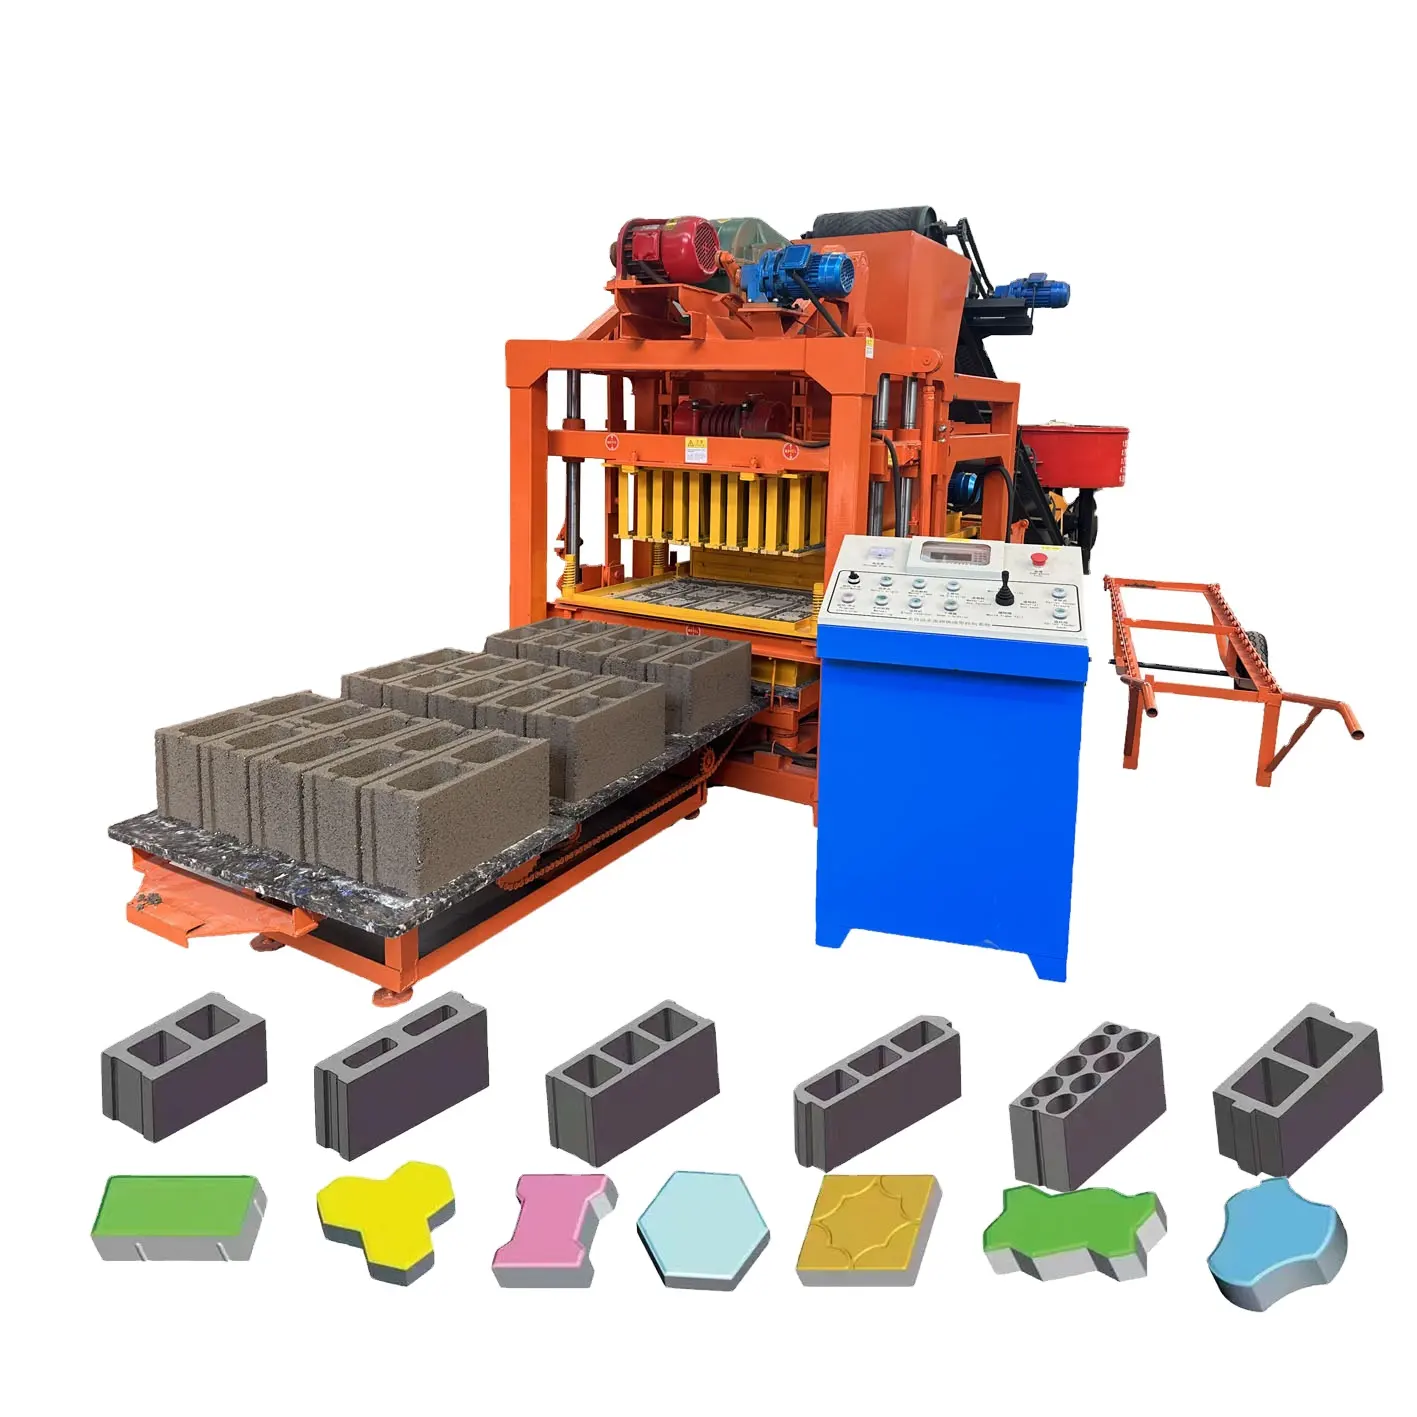 Used QT4-25 Recycling Machine Plastic Waste JH-12 Brick Making Machinery-Farm Industries' Solution Eco-Friendly Using Cement